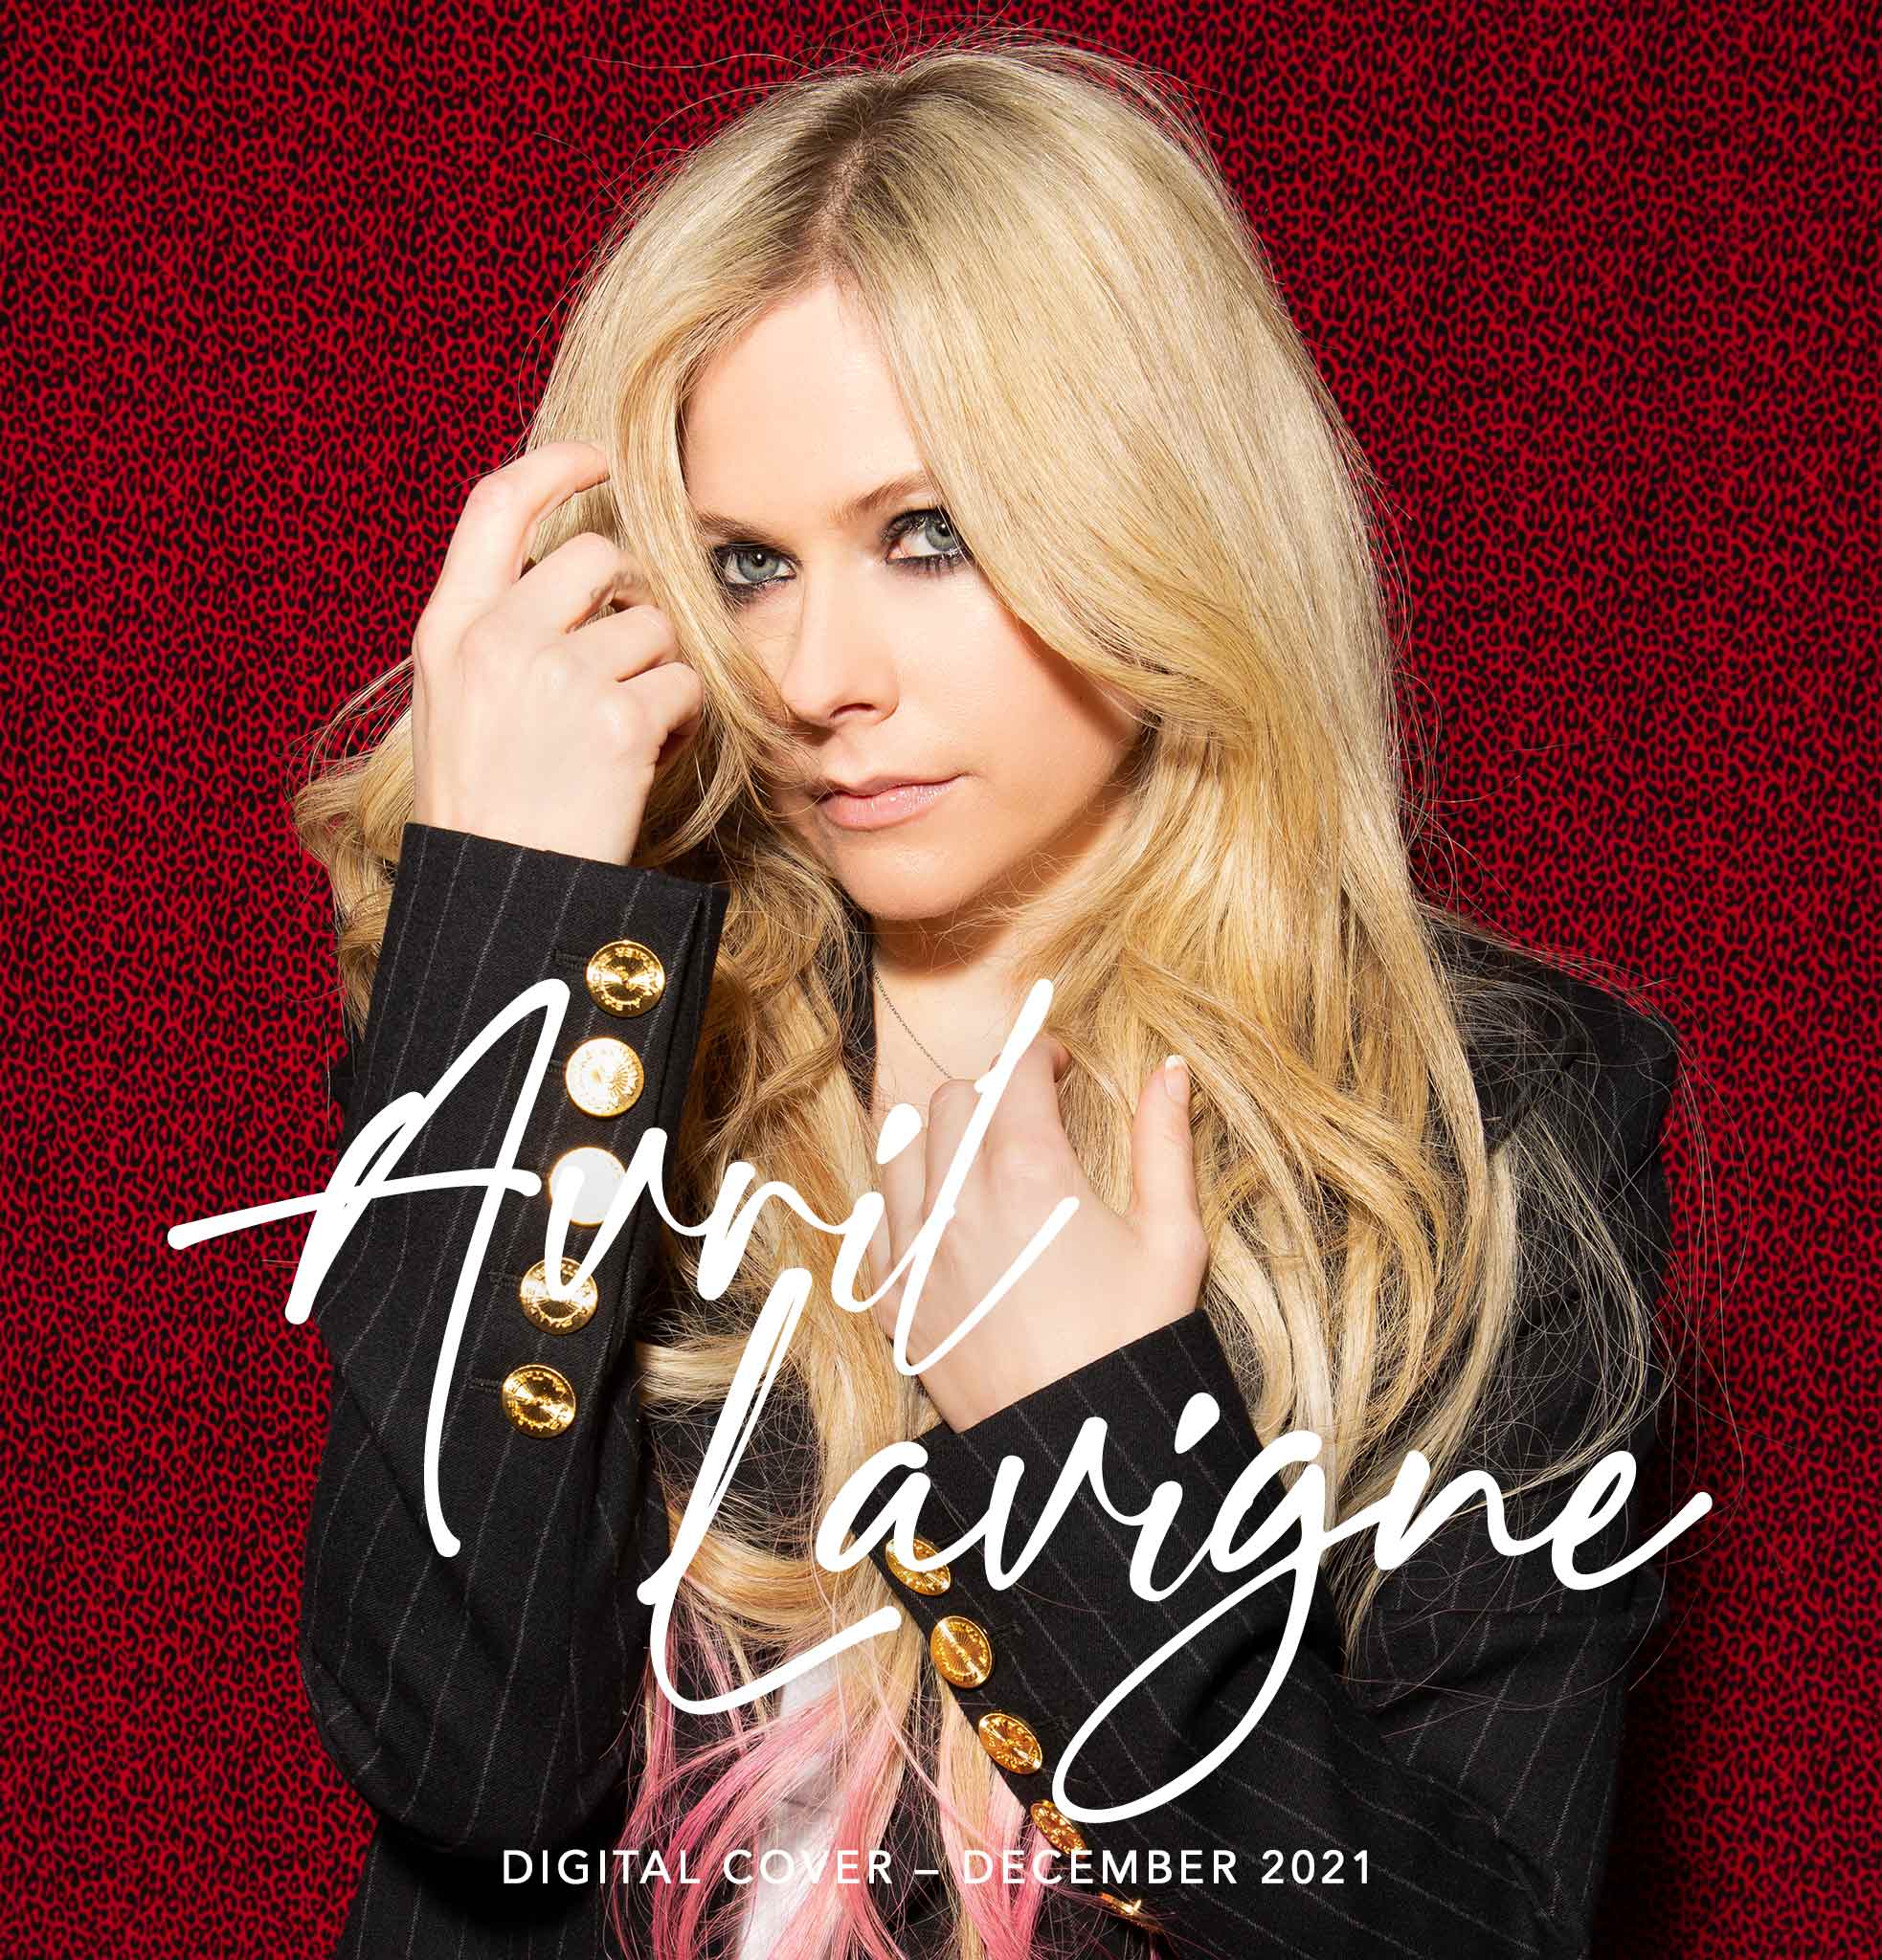 Avril Lavigne interview "I'm excited to be 20 years in and still